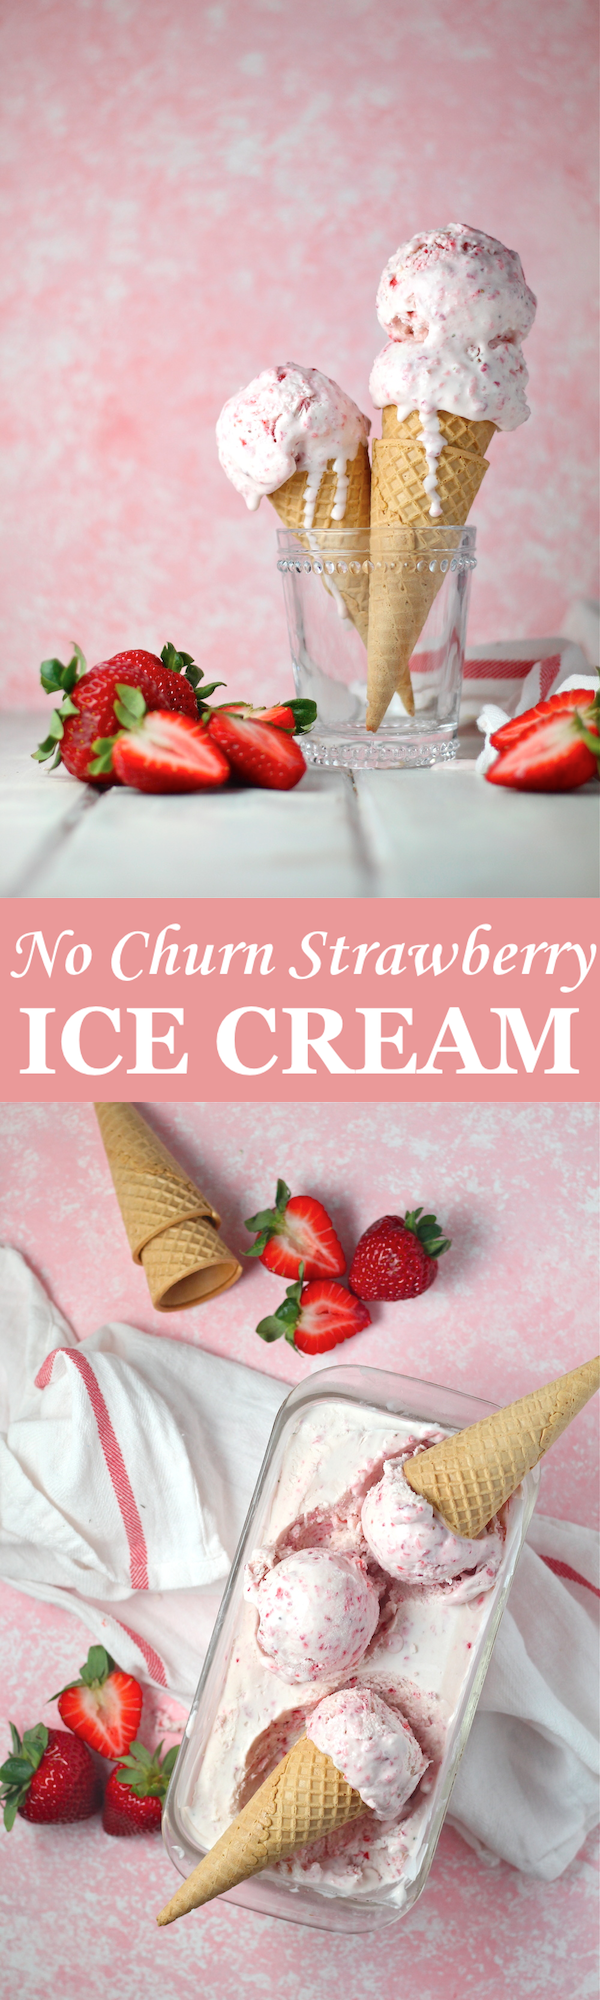 This No Churn Strawberry Ice Cream is a fantastic sweet, fruity, and creamy homemade dessert! | The Millennial Cook #spring #springrecipe #icecream #strawberry